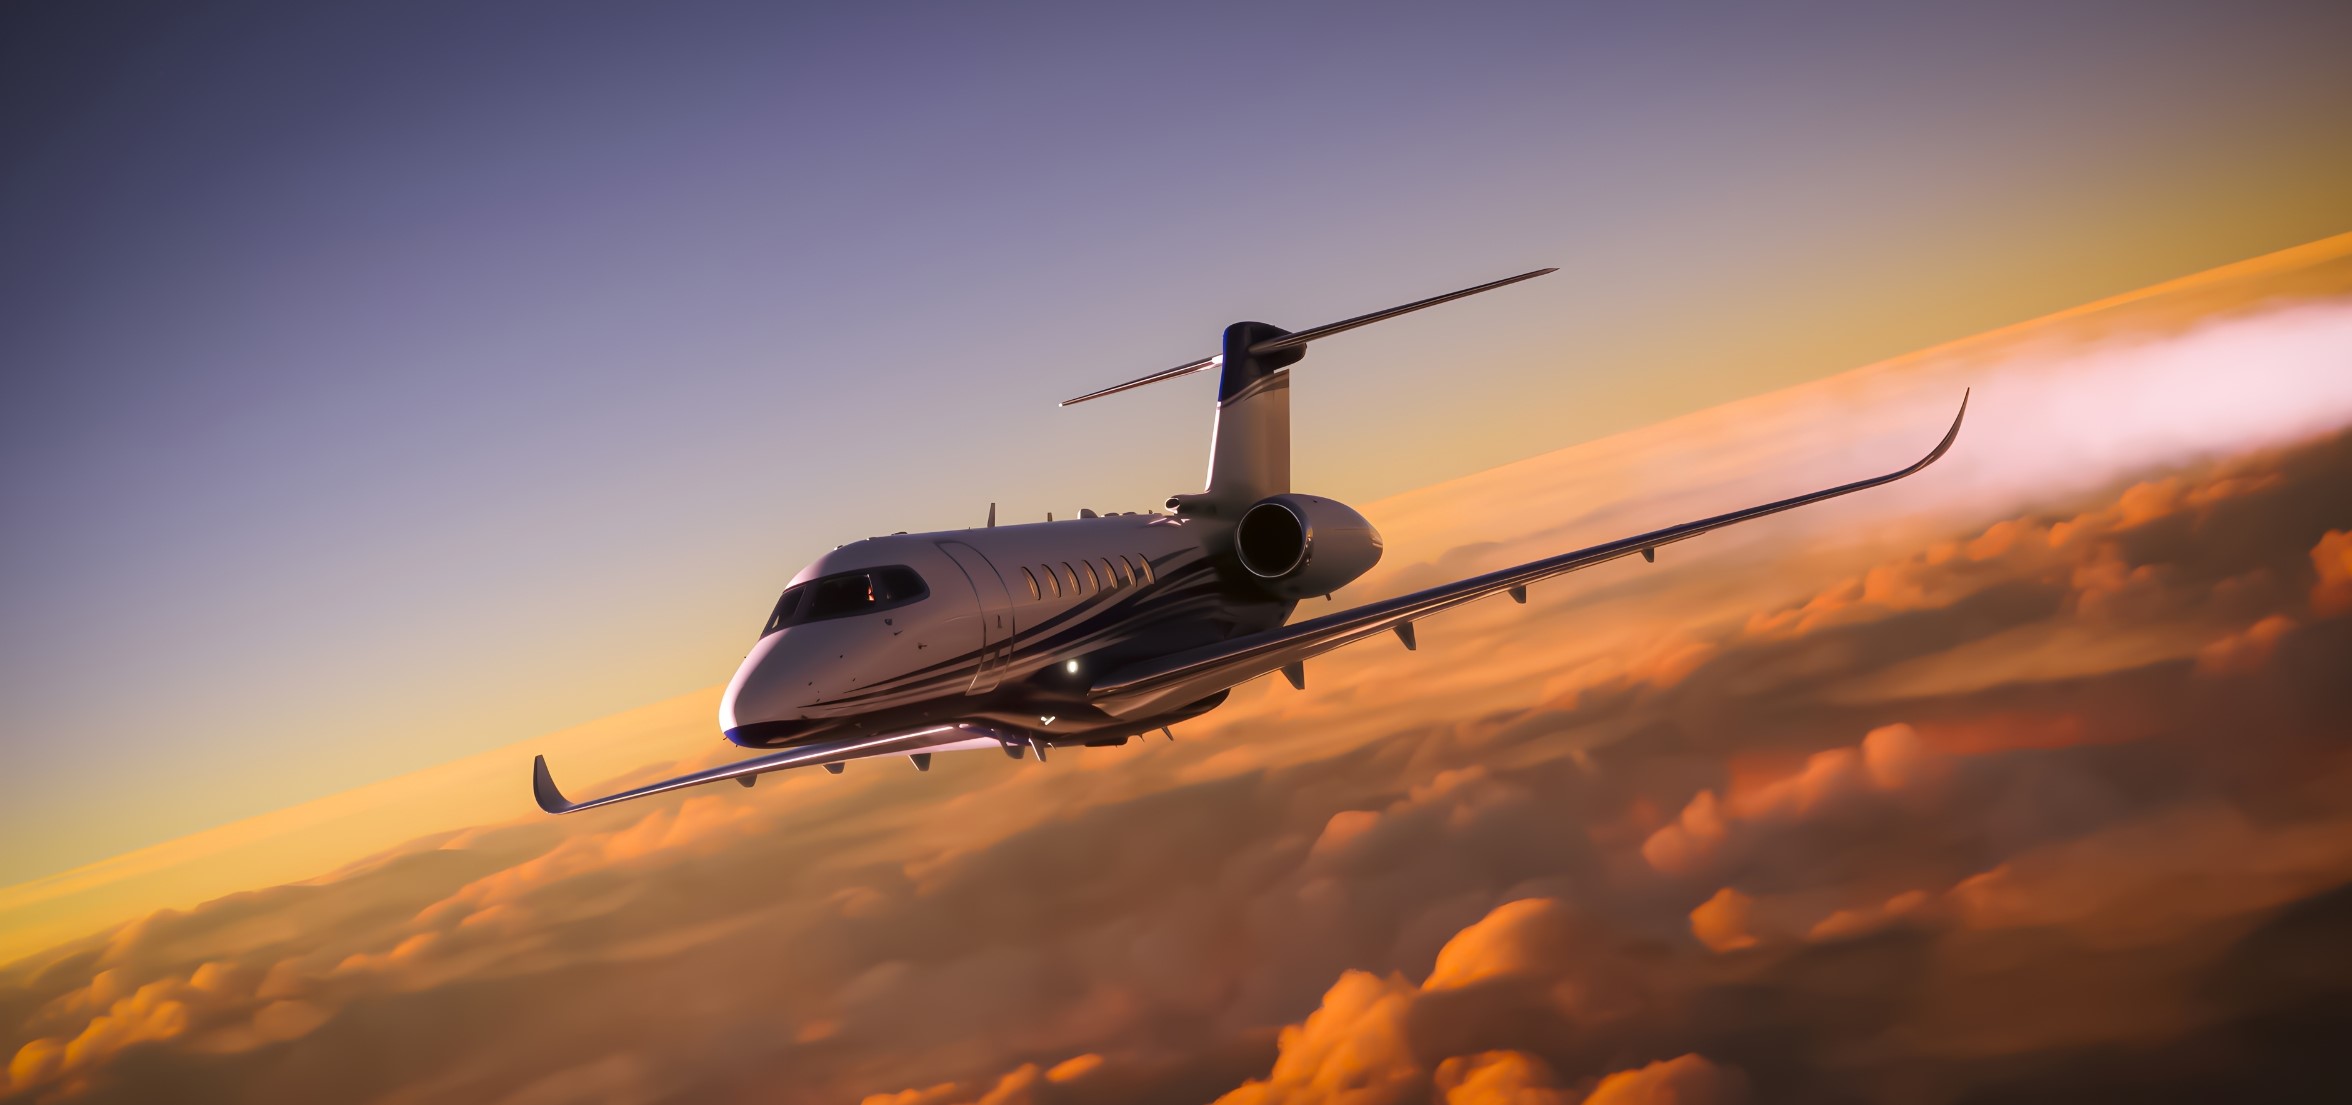 Luxury private jet in flight above the clouds at sunset